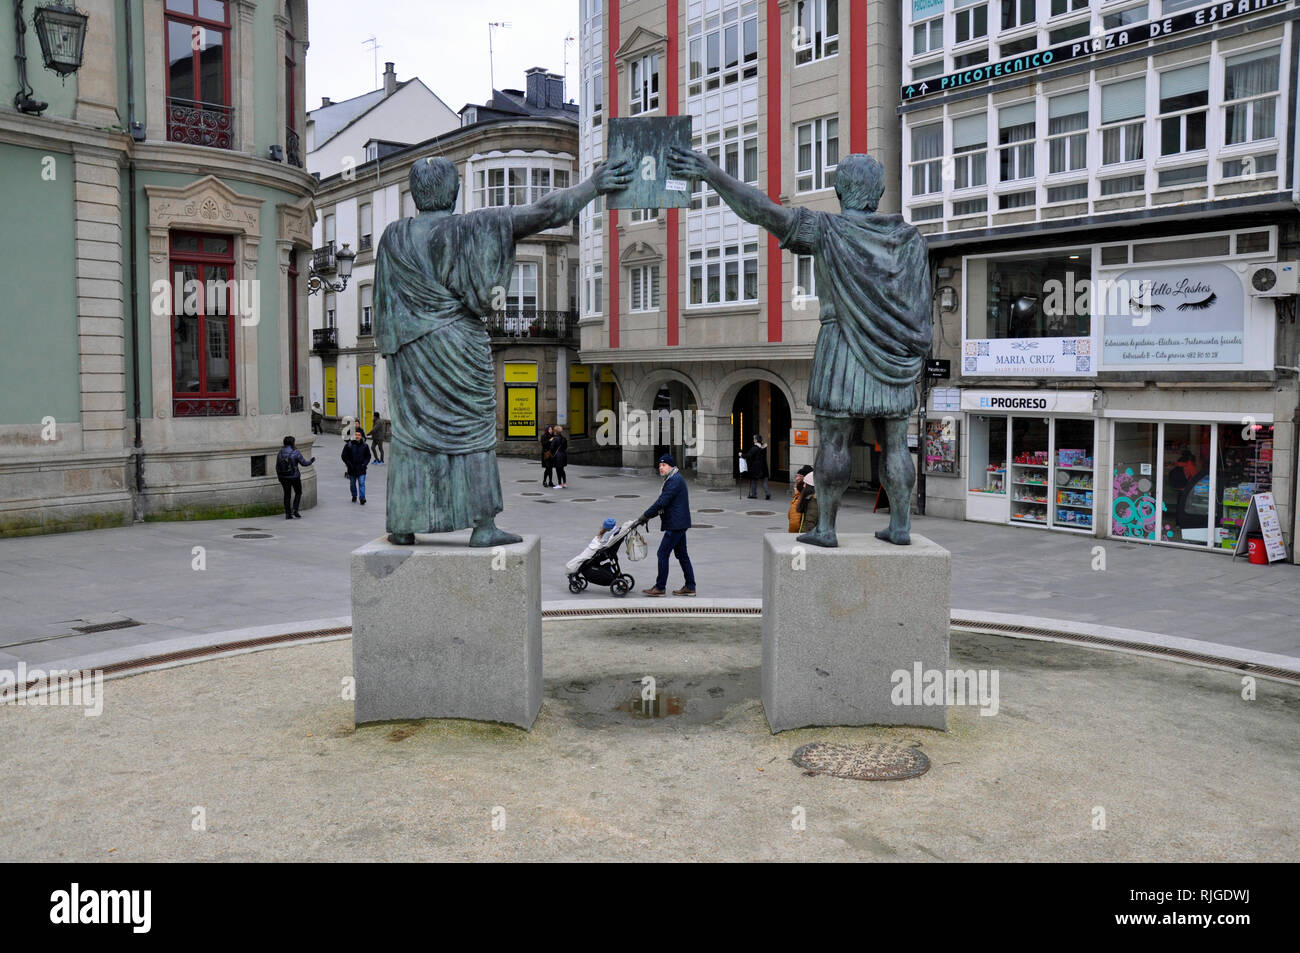 Statues of Caesar Augustus and Fabius Maximus Paulo in Lugo's main square, a reminder that the city was founded by the Roman Empire. Stock Photo